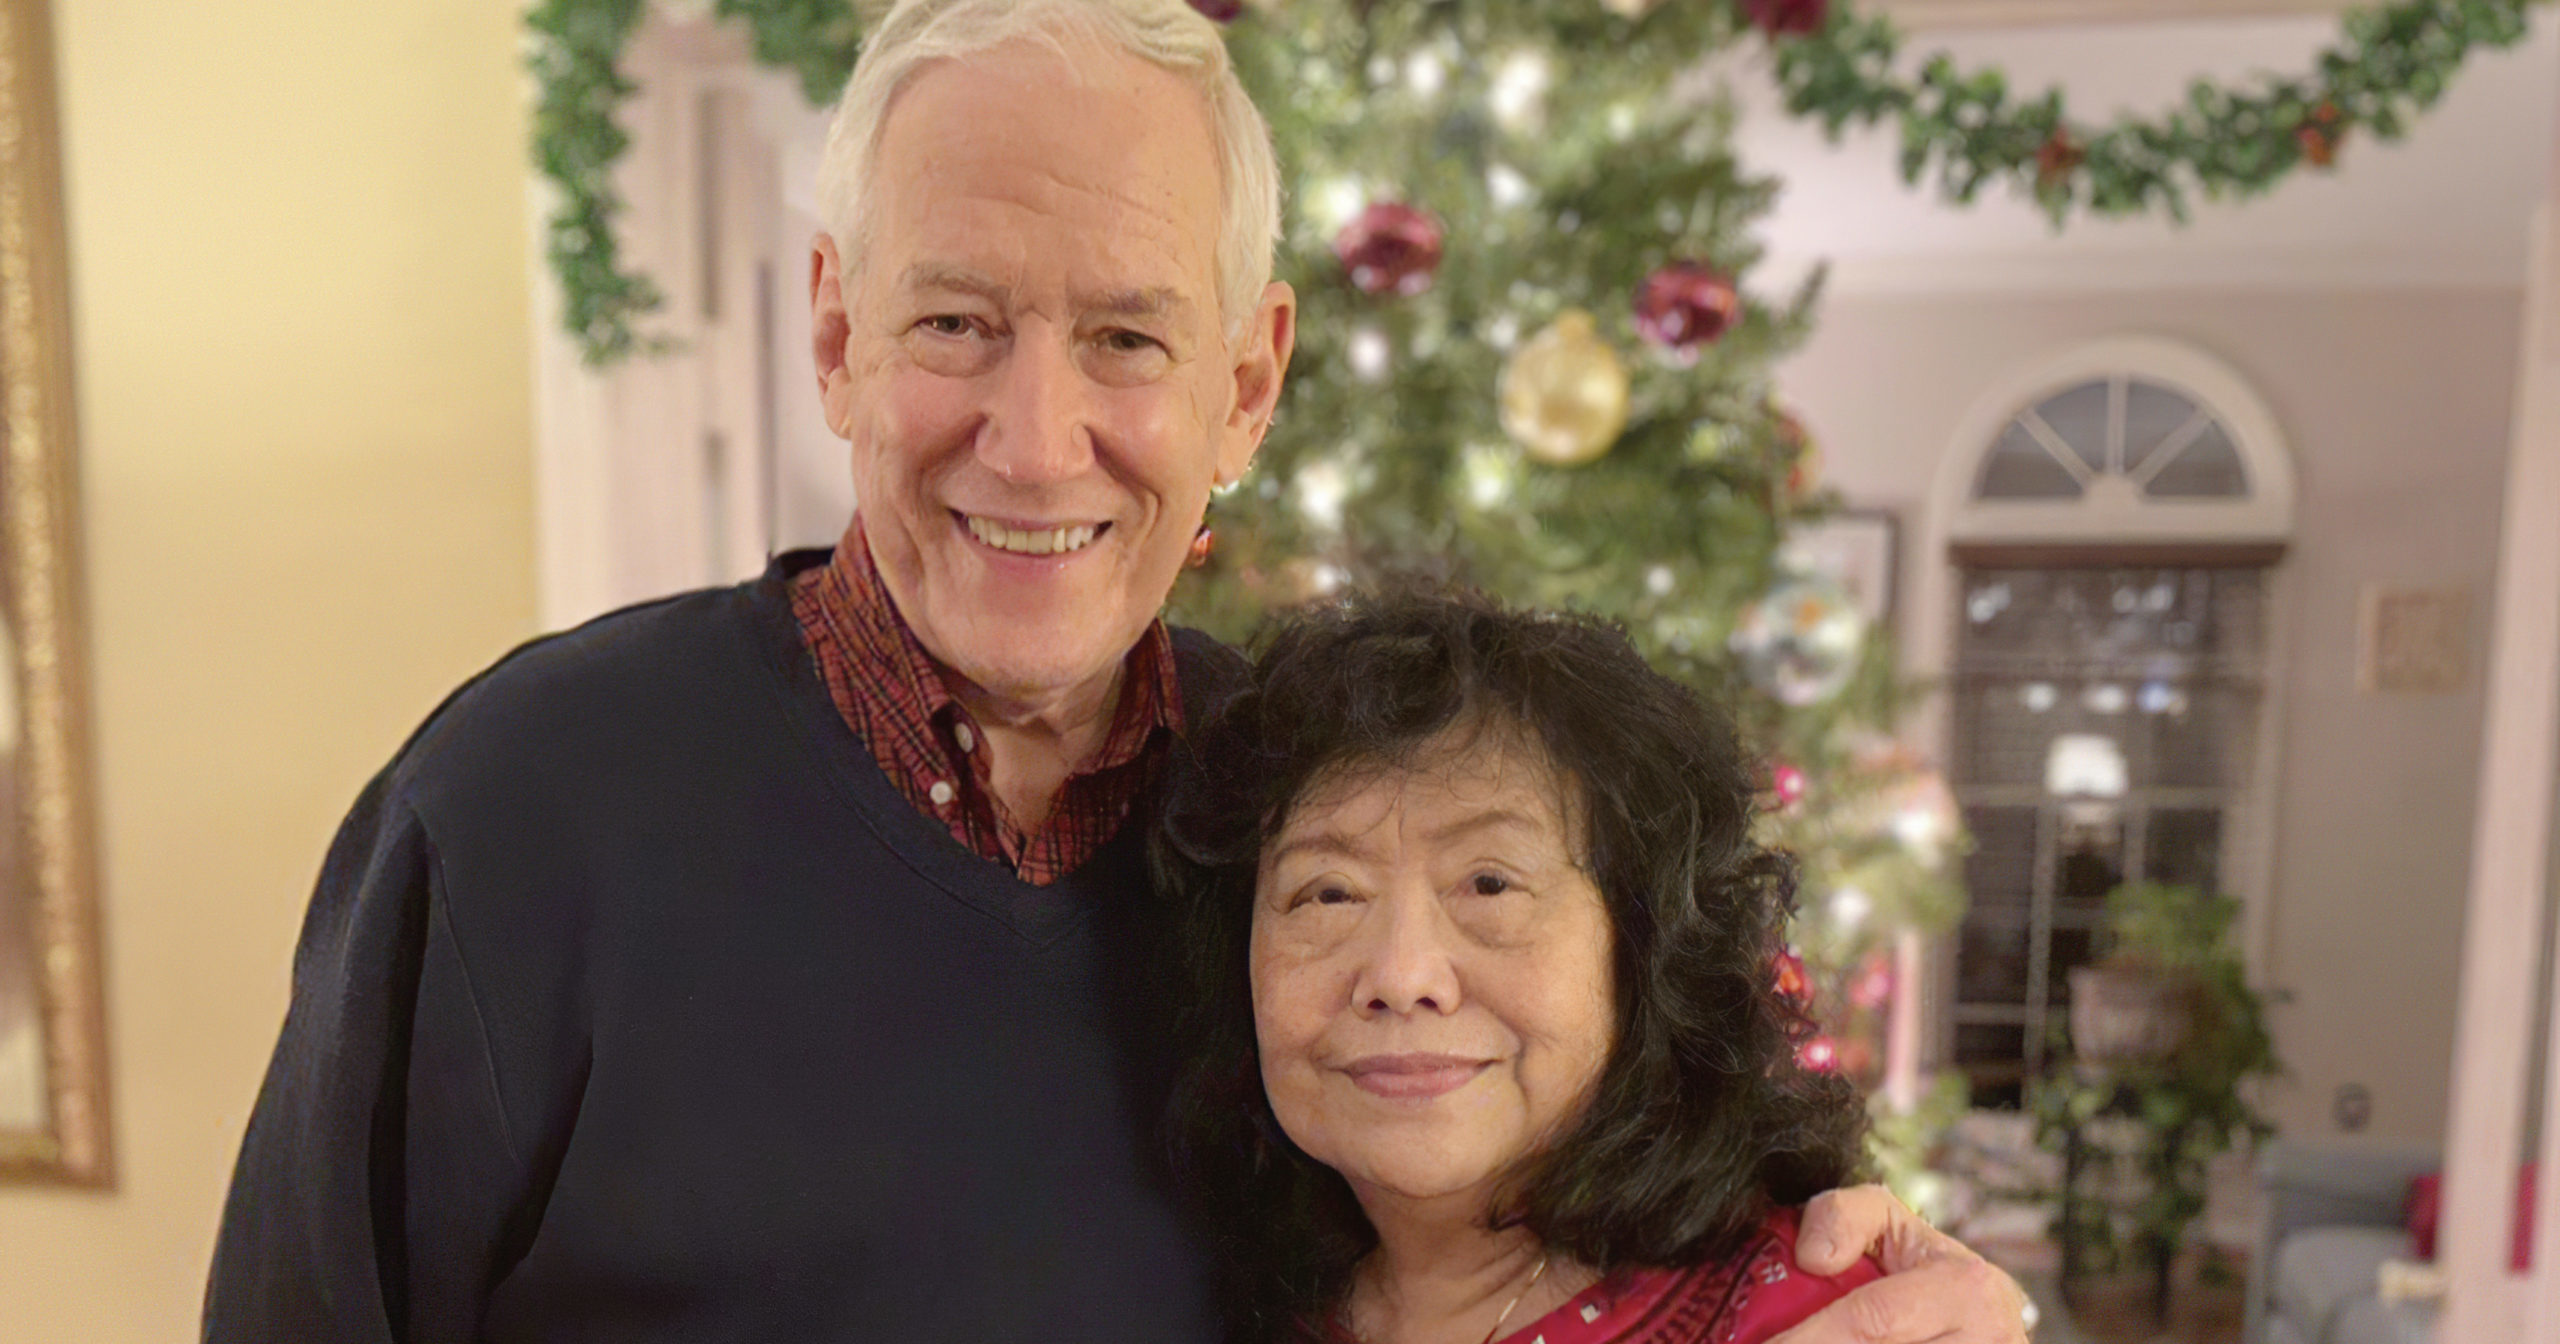 In this December, 2018, photo released by the Stemberger family, Victor and his wife Han Stemberger are shown at their home in Centreville, Virginia.